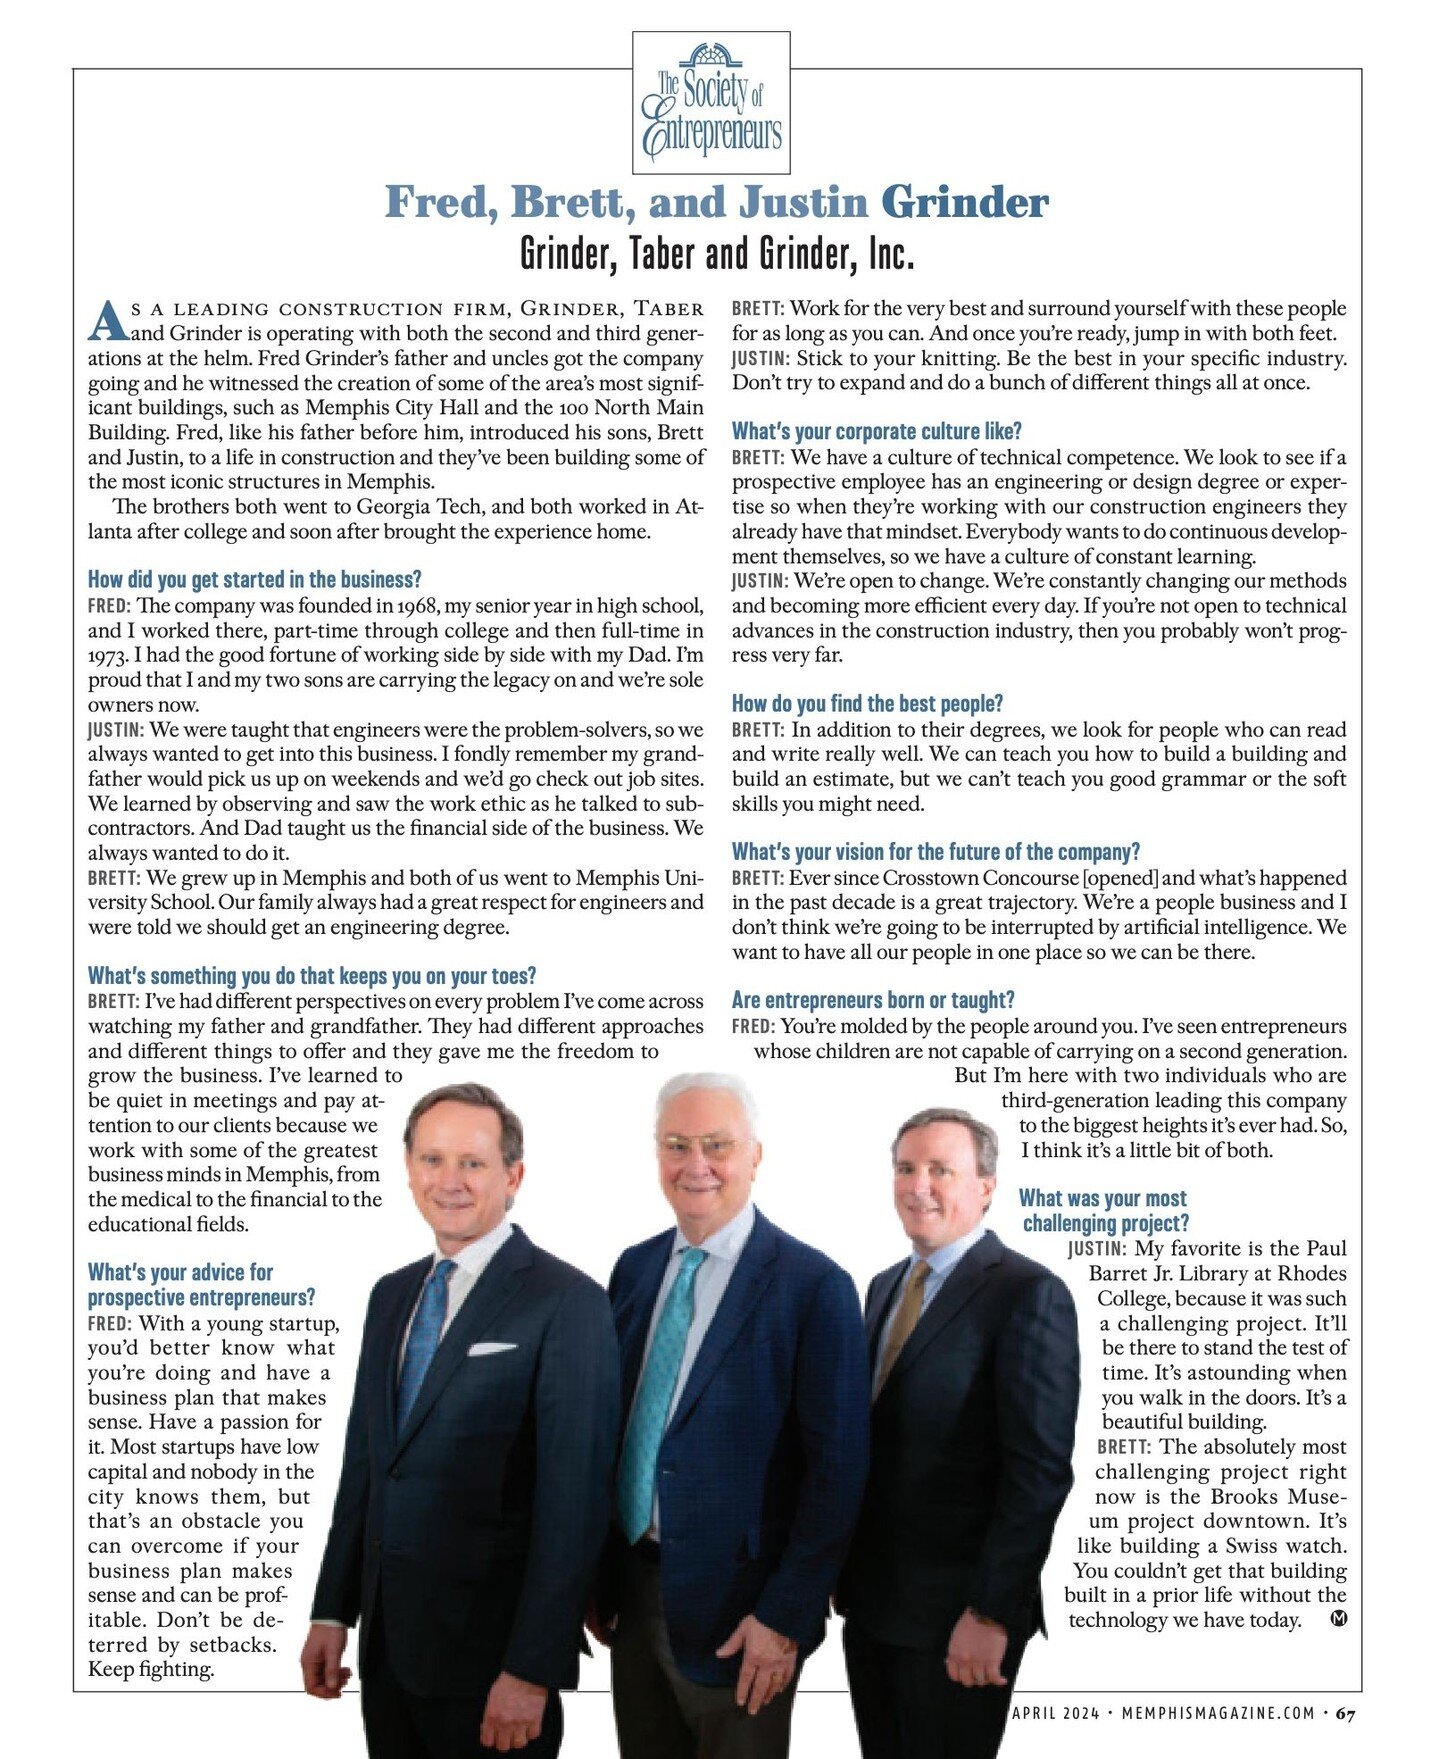 We are so pleased to share the Society of Entrepreneur profile of Grinder, Taber, &amp; Grinder and our leaders in the latest issue of Memphis Magazine! 

#GrinderTaber #BuildingMemphis #BuildingRelationships #construction #commercialcontractor #newc